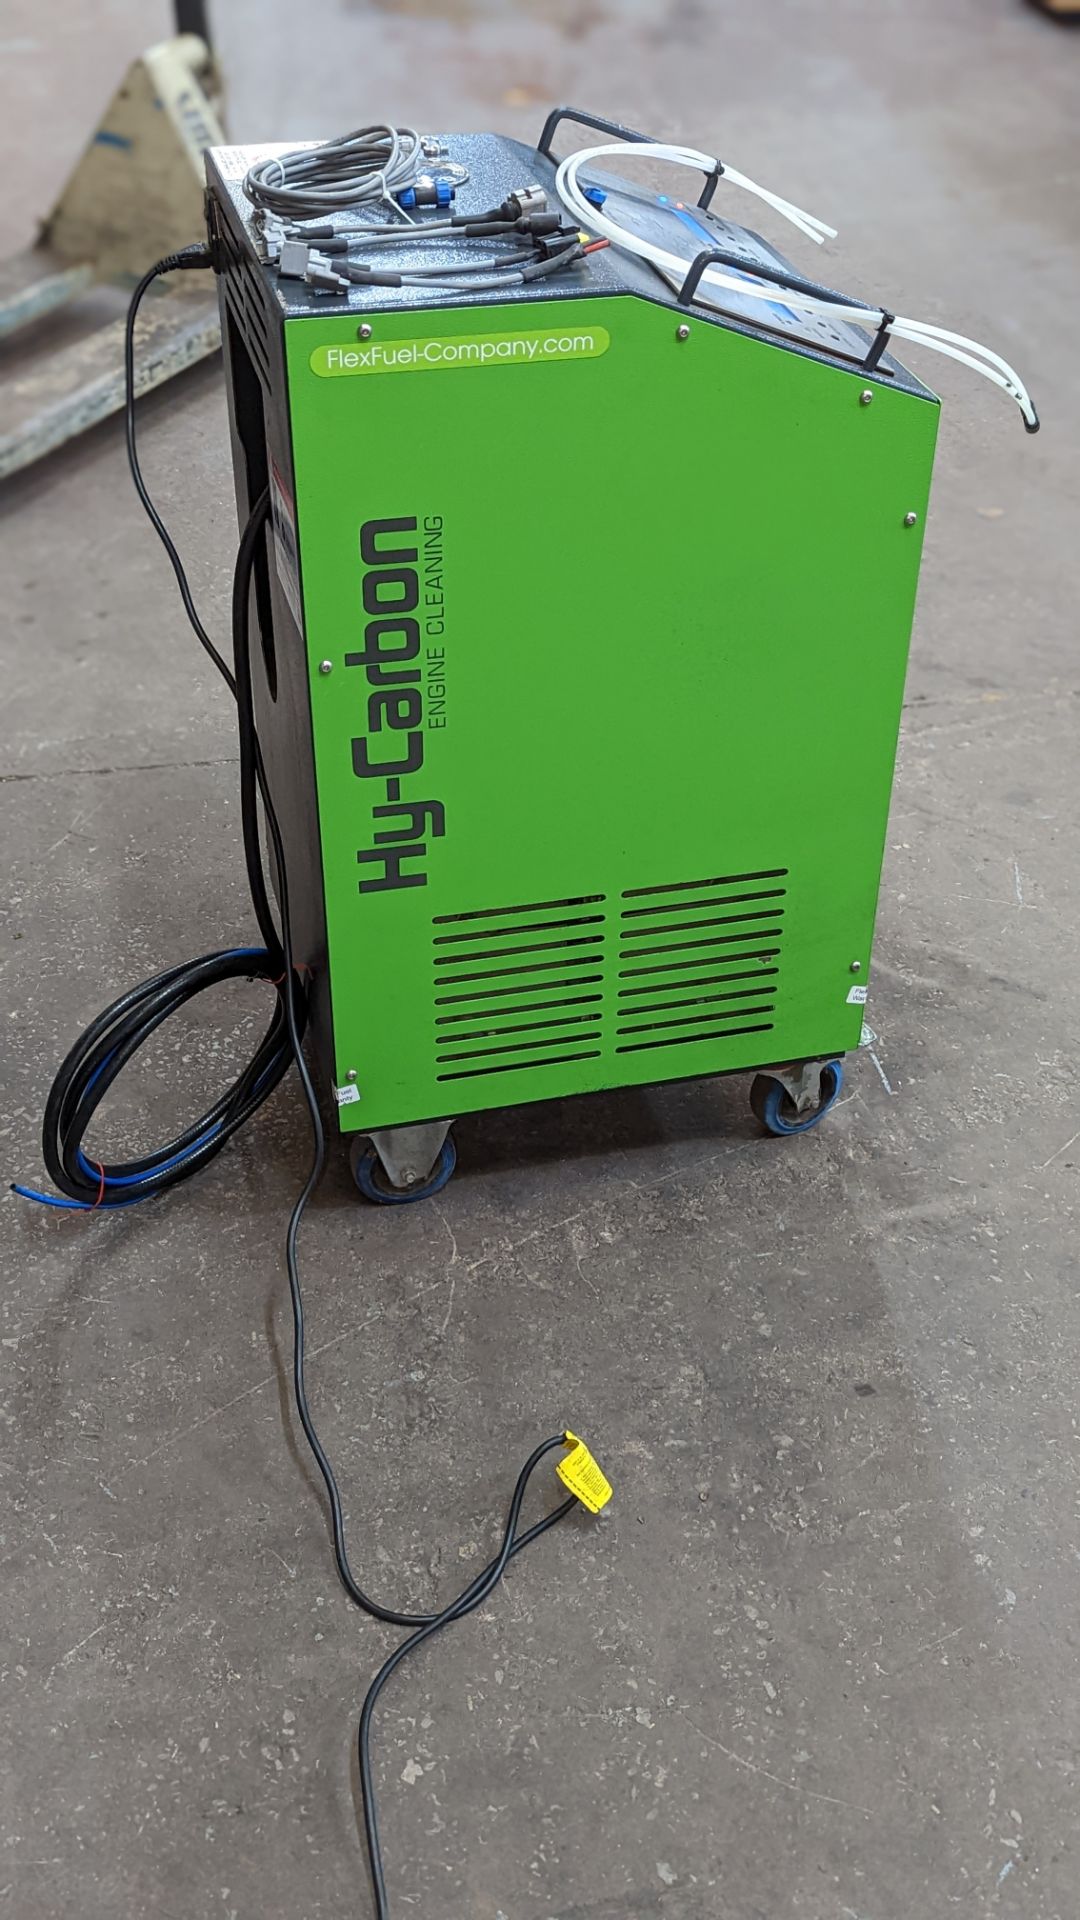 Flex Fuel Hy-Carbon EGR Pilot 1000S engine cleaning machine including cover. Purchased new in 2019 - Image 14 of 19